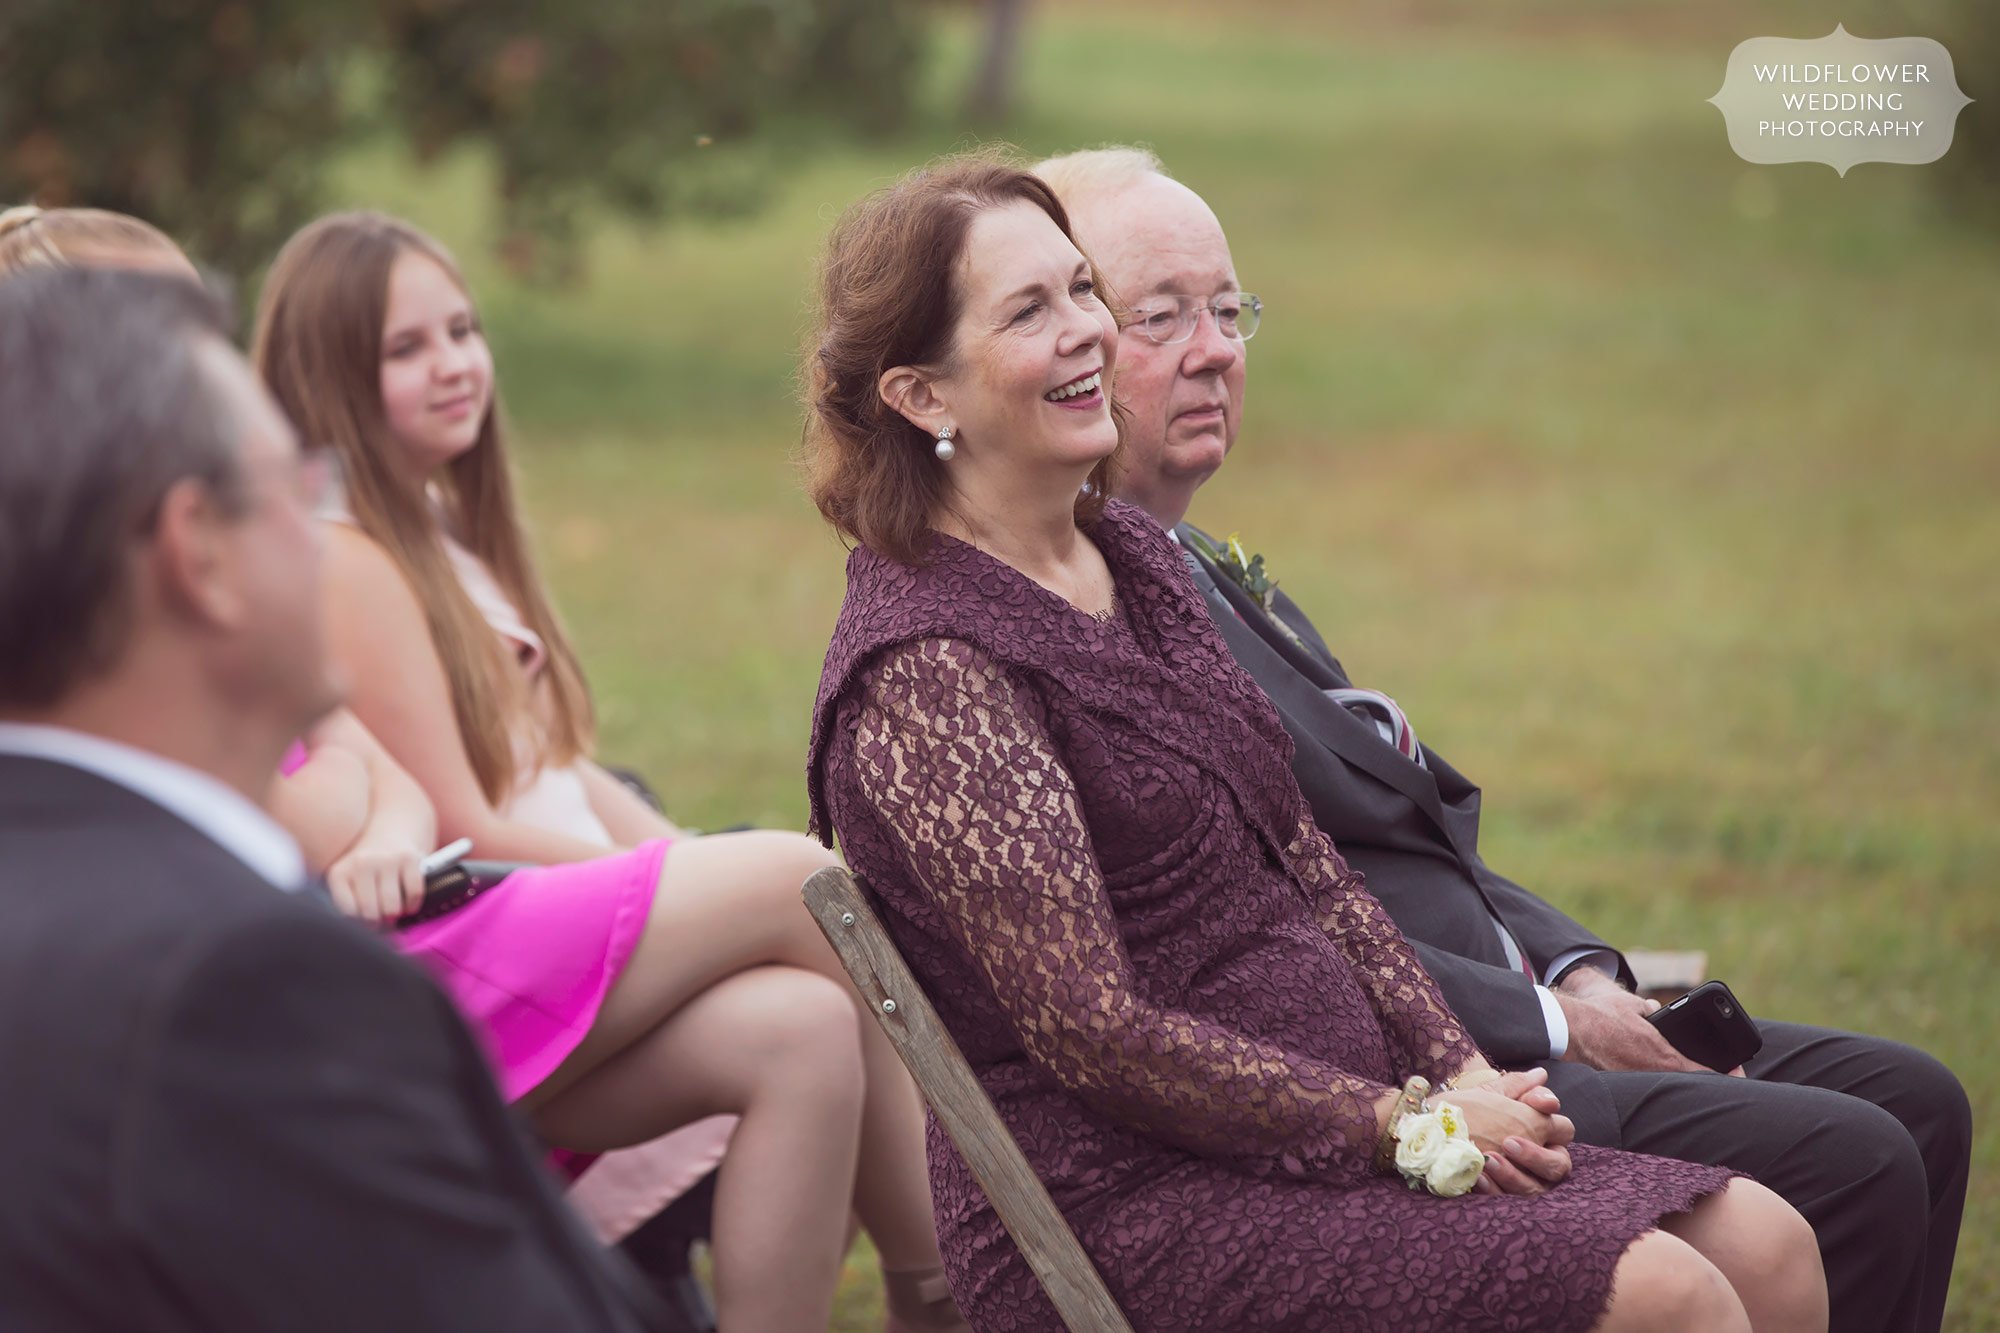 The mother of the groom watches the outdoor ceremony in Weston, MO.